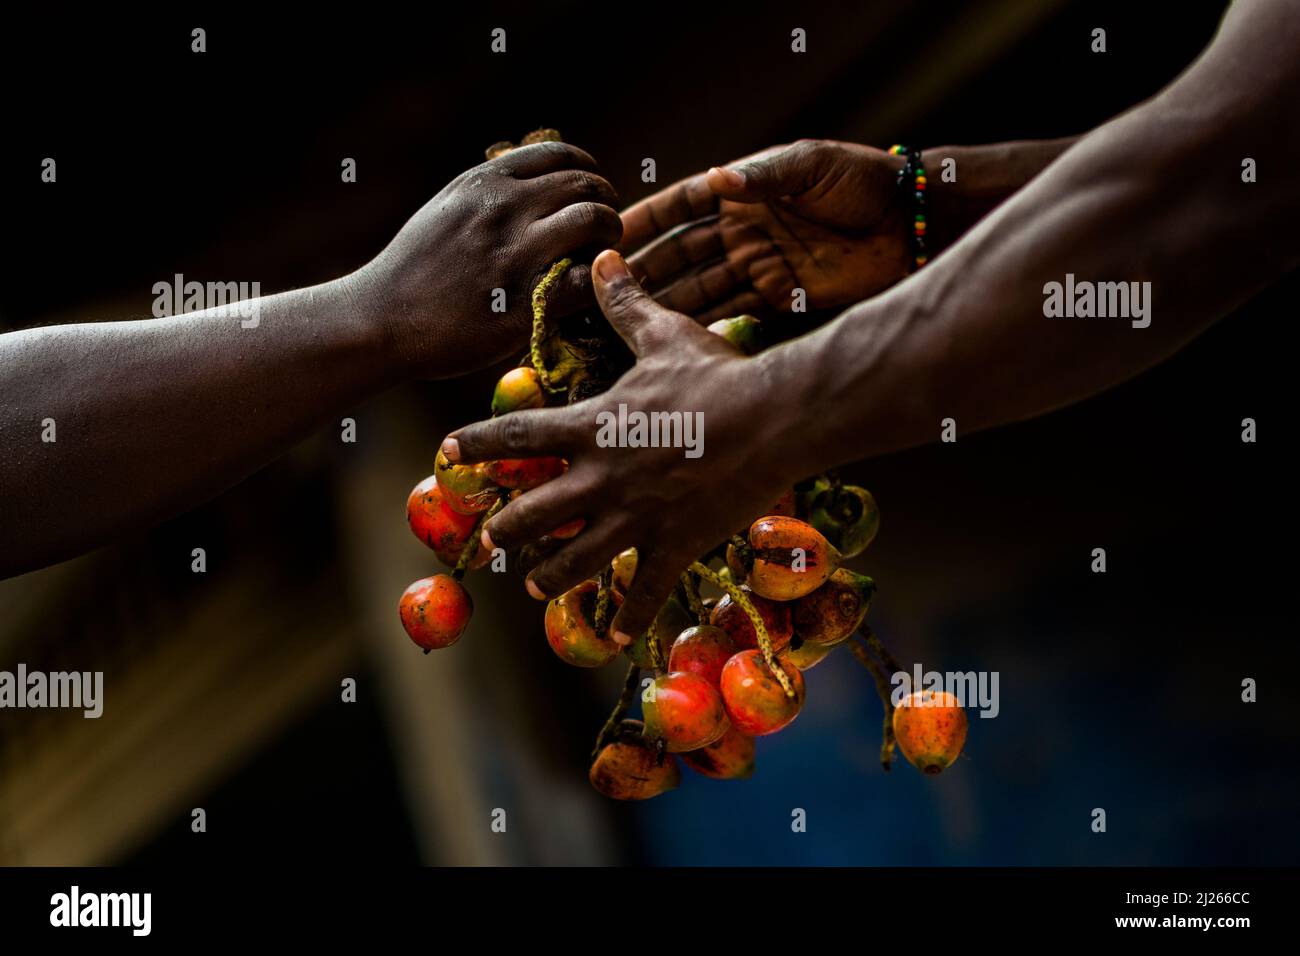 Hands of Afro-Colombian workers are seen holding a bunch of chontaduro (peach palm) fruits in a processing facility in Cali, Valle del Cauca, Colombia. Stock Photo